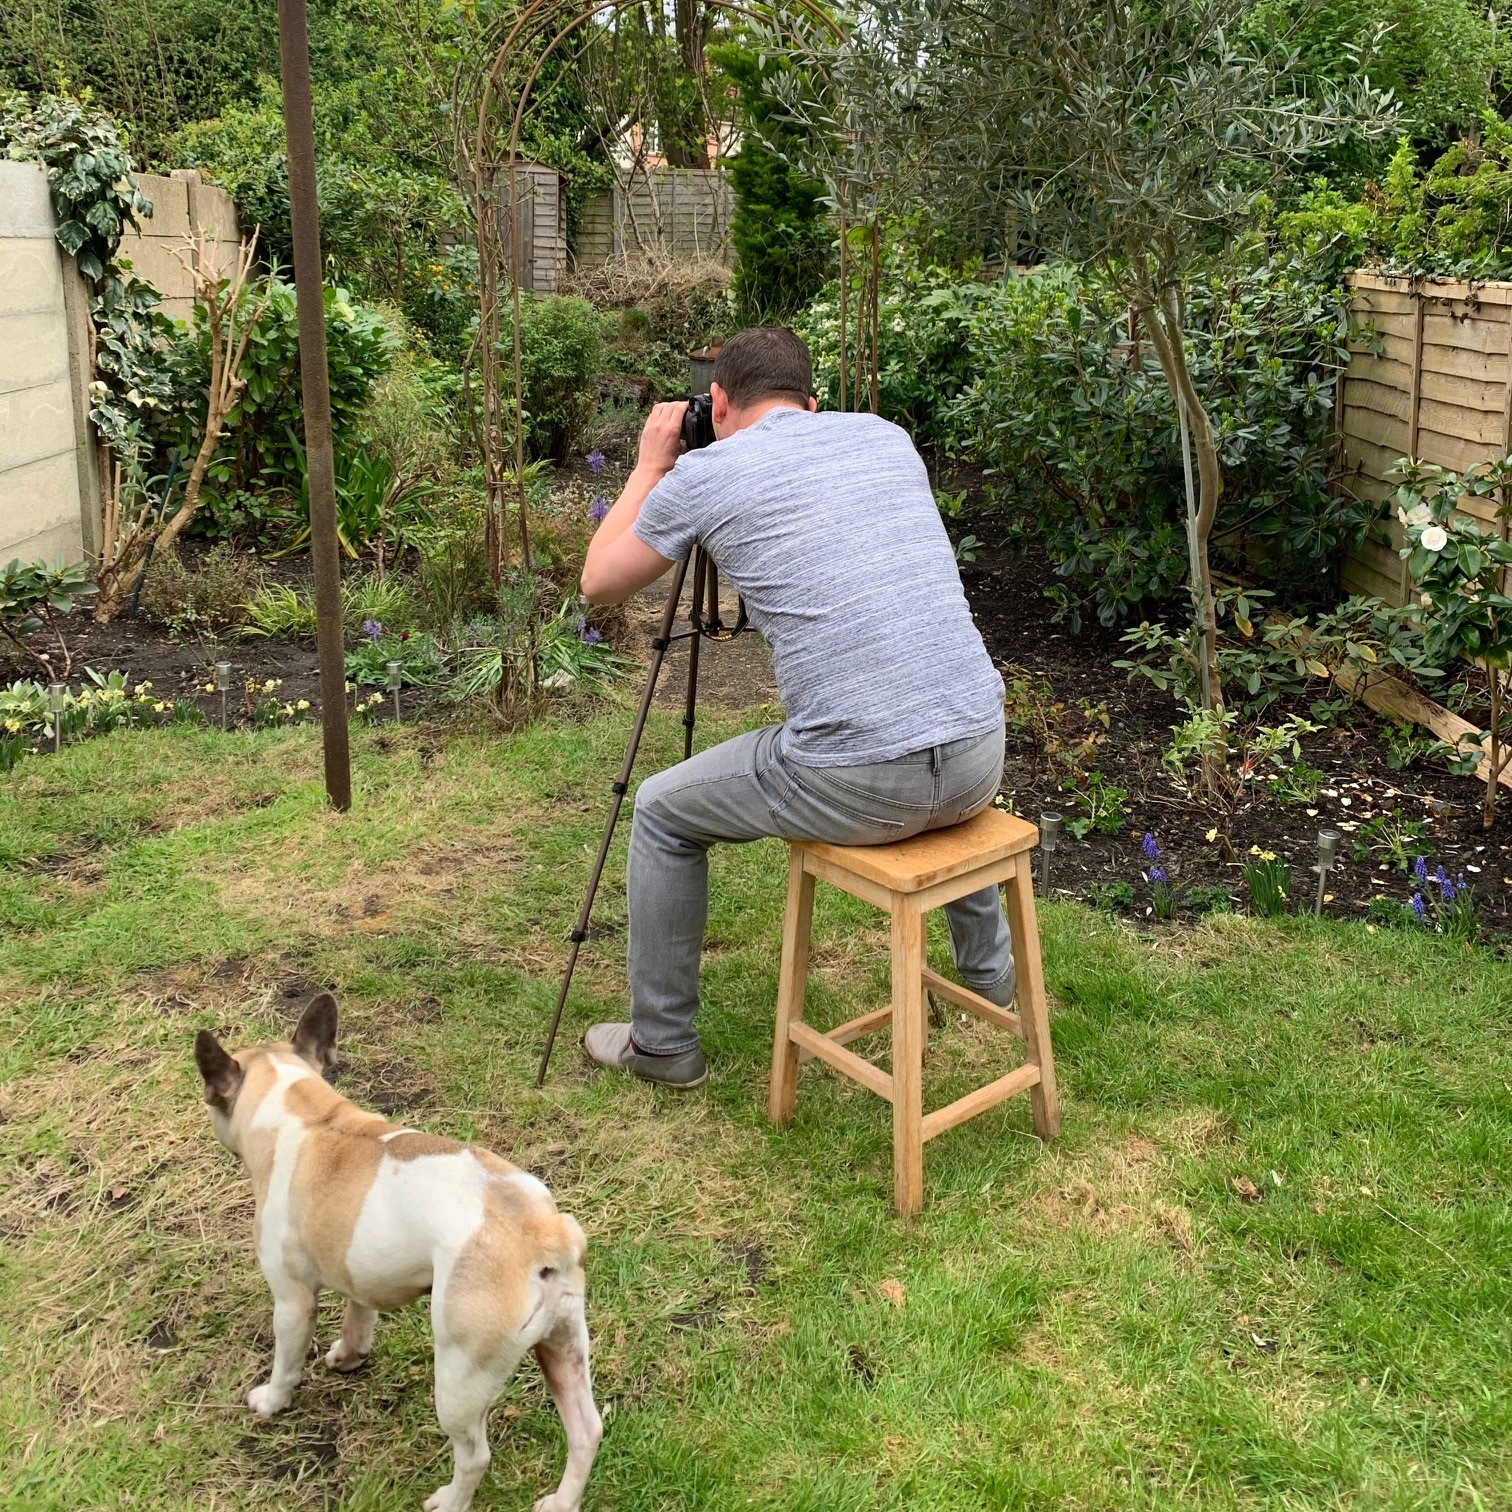 Peter Meager taking a photo in his garden with his dog